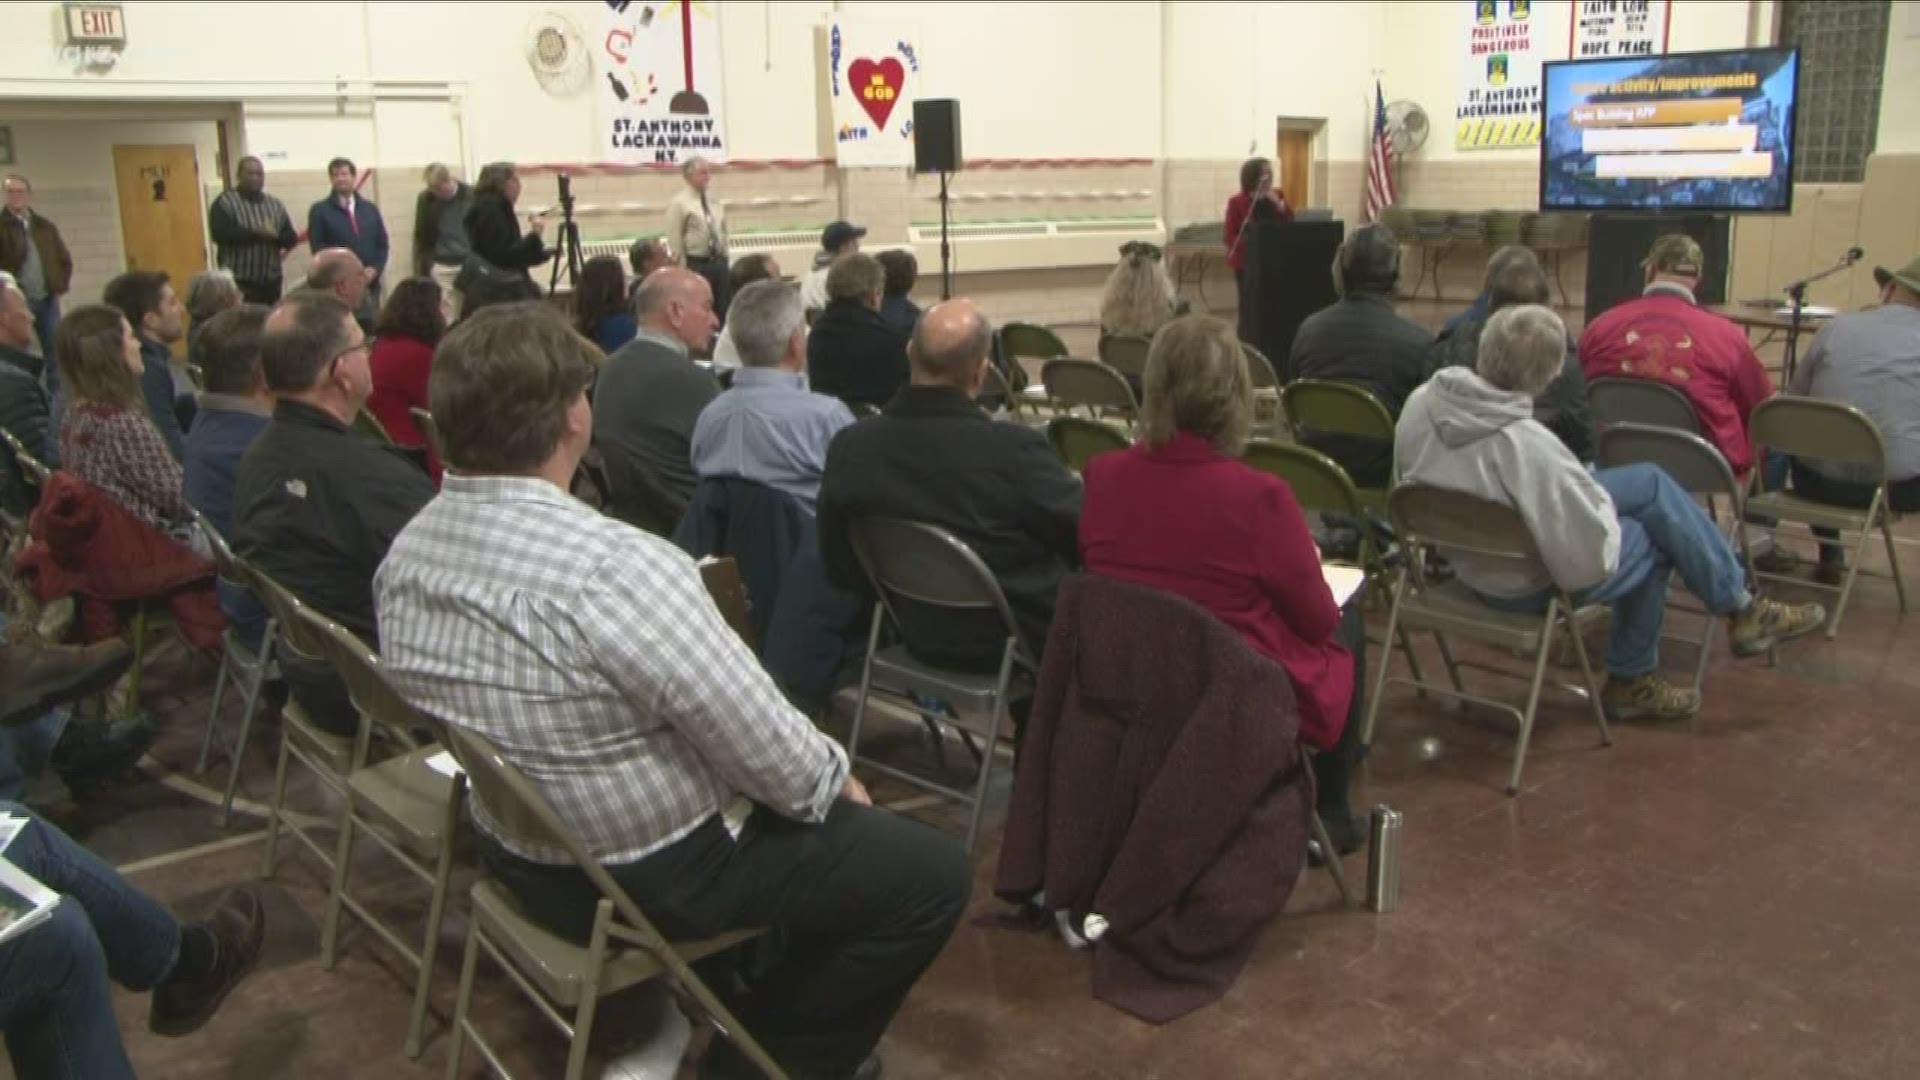 Many who attended the public meeting held Tuesday evening said they would like to see better access to the waterfront.